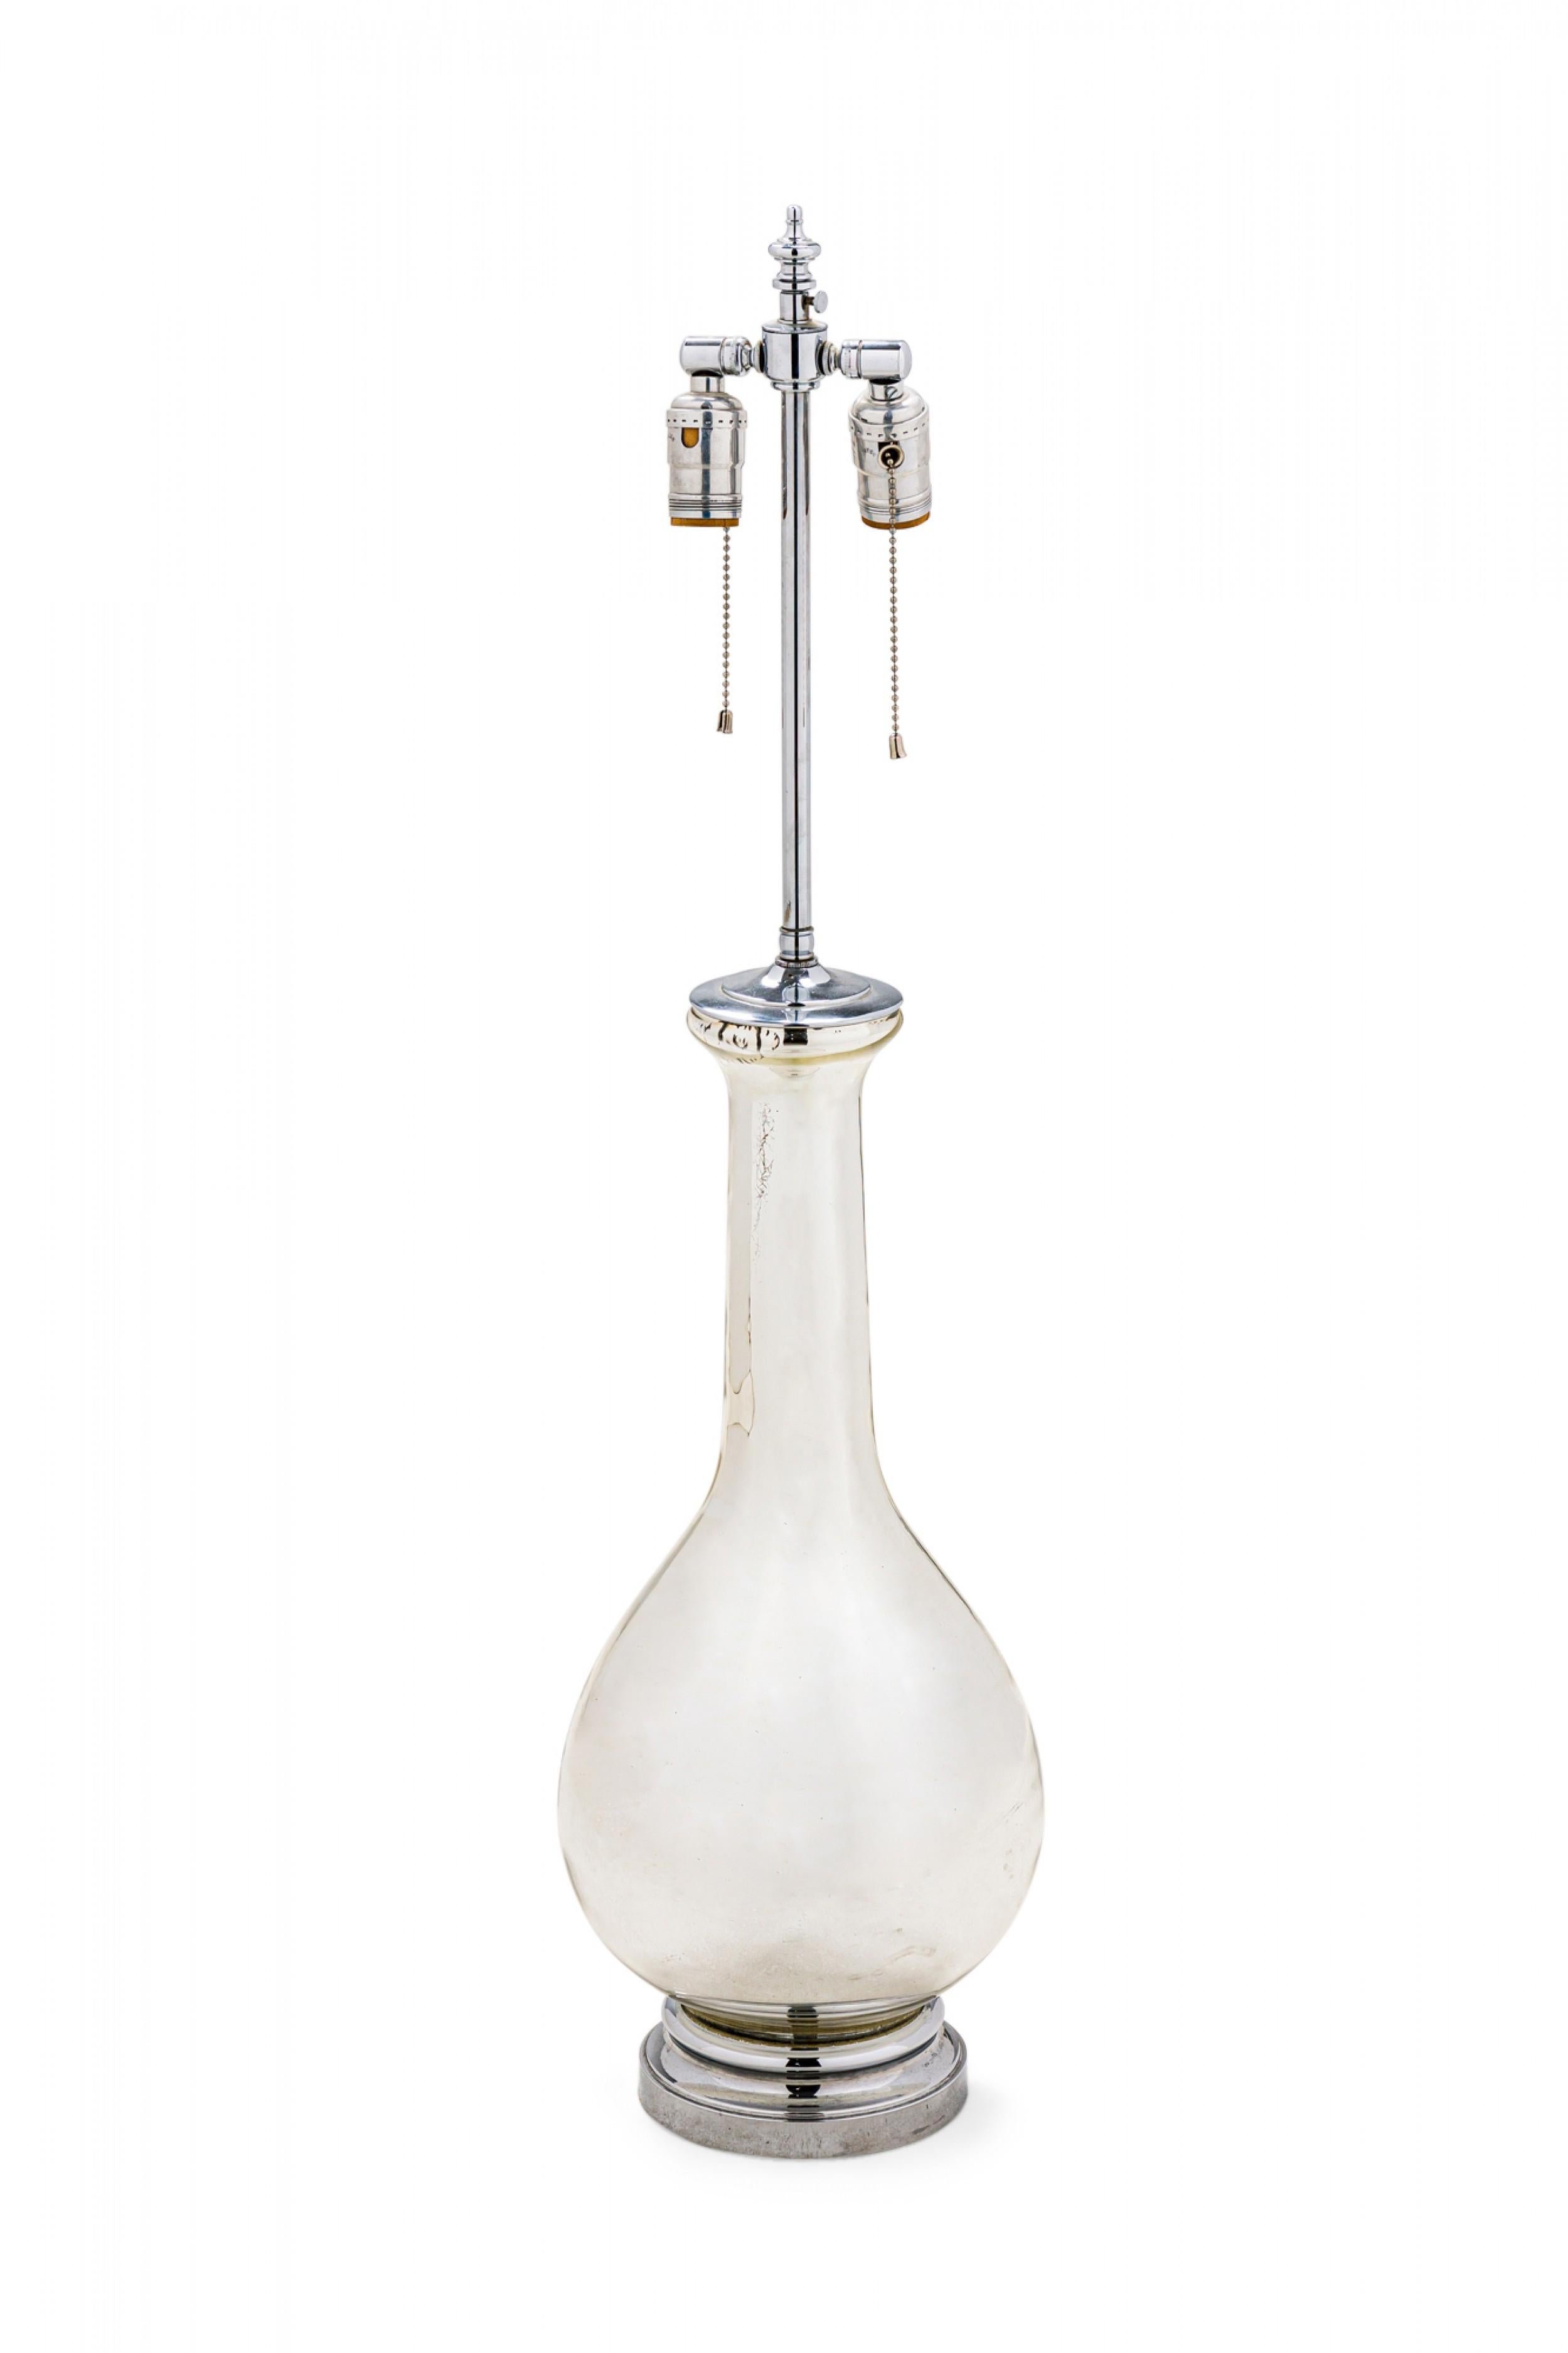 20th Century Tyndale Mid-Century American Mercury Glass Genie Bottle Table Lamp For Sale